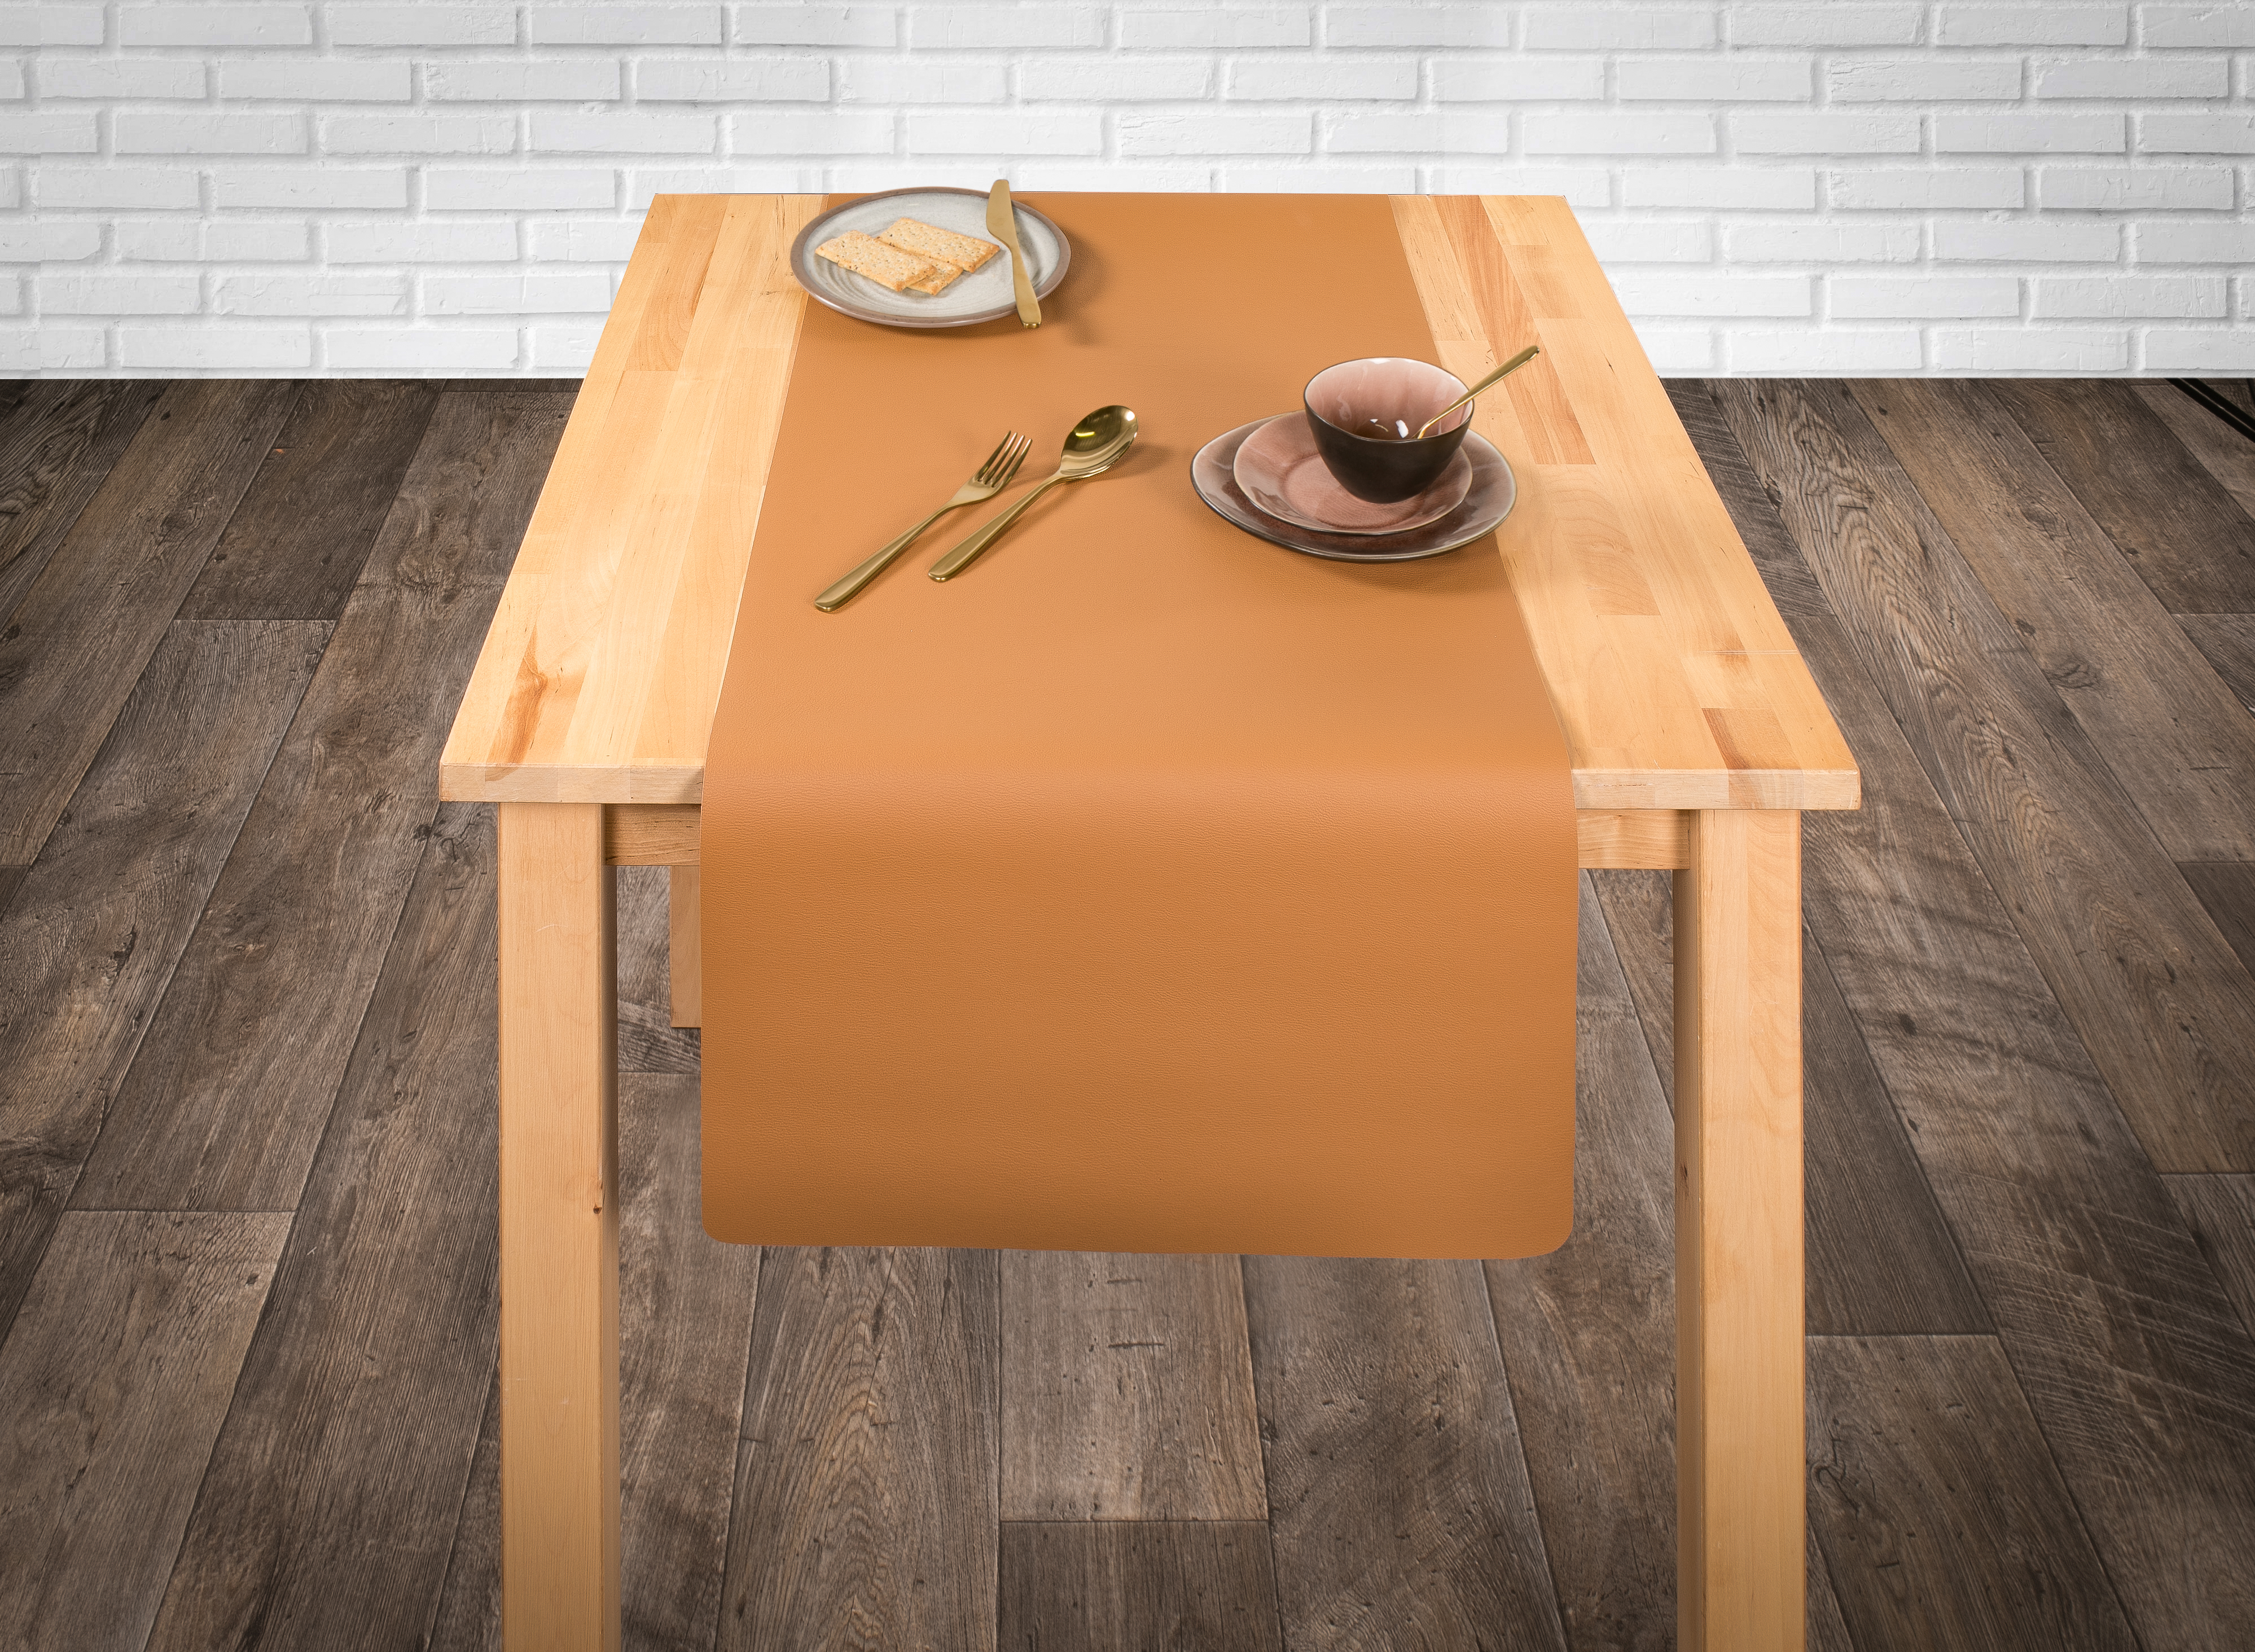 Table runner - Leather look imitation - 45X145cm, camel